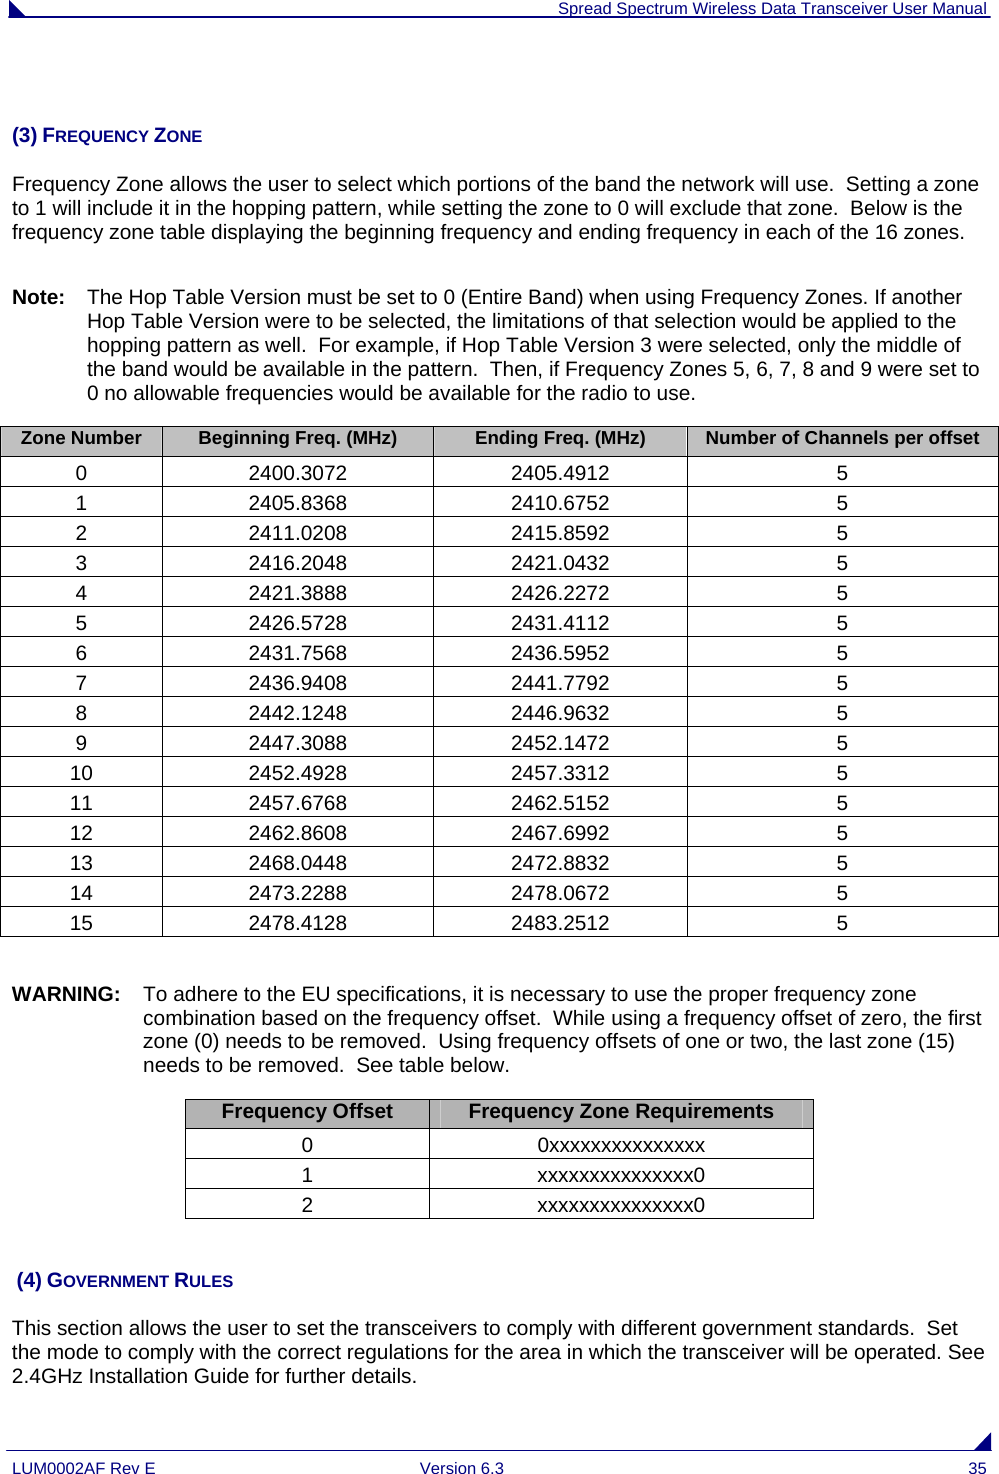  Spread Spectrum Wireless Data Transceiver User Manual LUM0002AF Rev E  Version 6.3  35  (3) FREQUENCY ZONE Frequency Zone allows the user to select which portions of the band the network will use.  Setting a zone to 1 will include it in the hopping pattern, while setting the zone to 0 will exclude that zone.  Below is the frequency zone table displaying the beginning frequency and ending frequency in each of the 16 zones.  Note:   The Hop Table Version must be set to 0 (Entire Band) when using Frequency Zones. If another Hop Table Version were to be selected, the limitations of that selection would be applied to the hopping pattern as well.  For example, if Hop Table Version 3 were selected, only the middle of the band would be available in the pattern.  Then, if Frequency Zones 5, 6, 7, 8 and 9 were set to 0 no allowable frequencies would be available for the radio to use. Zone Number   Beginning Freq. (MHz) Ending Freq. (MHz) Number of Channels per offset0 2400.3072 2405.4912  5 1 2405.8368 2410.6752  5 2 2411.0208 2415.8592  5 3 2416.2048 2421.0432  5 4 2421.3888 2426.2272  5 5 2426.5728 2431.4112  5 6 2431.7568 2436.5952  5 7 2436.9408 2441.7792  5 8 2442.1248 2446.9632  5 9 2447.3088 2452.1472  5 10 2452.4928  2457.3312  5 11 2457.6768  2462.5152  5 12 2462.8608  2467.6992  5 13 2468.0448  2472.8832  5 14 2473.2288  2478.0672  5 15 2478.4128  2483.2512  5  WARNING:  To adhere to the EU specifications, it is necessary to use the proper frequency zone combination based on the frequency offset.  While using a frequency offset of zero, the first zone (0) needs to be removed.  Using frequency offsets of one or two, the last zone (15) needs to be removed.  See table below.  Frequency Offset  Frequency Zone Requirements 0 0xxxxxxxxxxxxxxx 1 xxxxxxxxxxxxxxx0 2 xxxxxxxxxxxxxxx0    (4) GOVERNMENT RULES This section allows the user to set the transceivers to comply with different government standards.  Set the mode to comply with the correct regulations for the area in which the transceiver will be operated. See 2.4GHz Installation Guide for further details. 